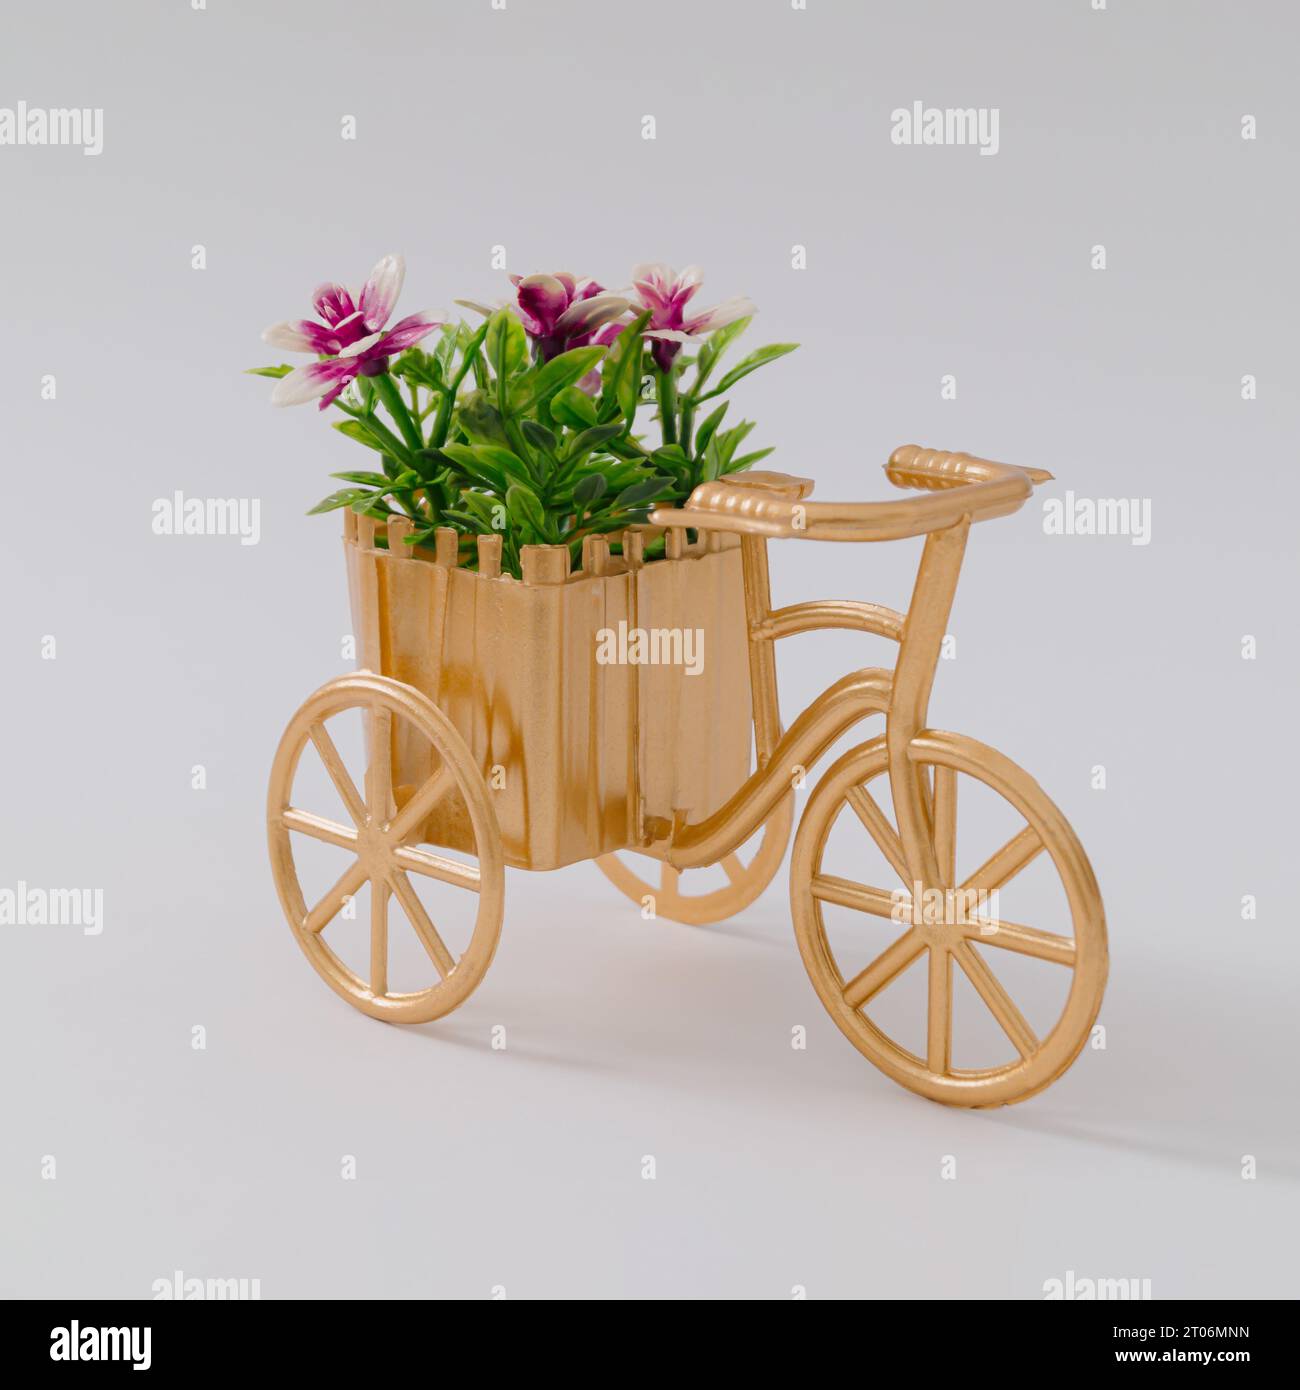 Retro golden bike with flowers against white background. Creative flower delivery concept. Minimal bike and flowers idea. Natural romantic card. Stock Photo